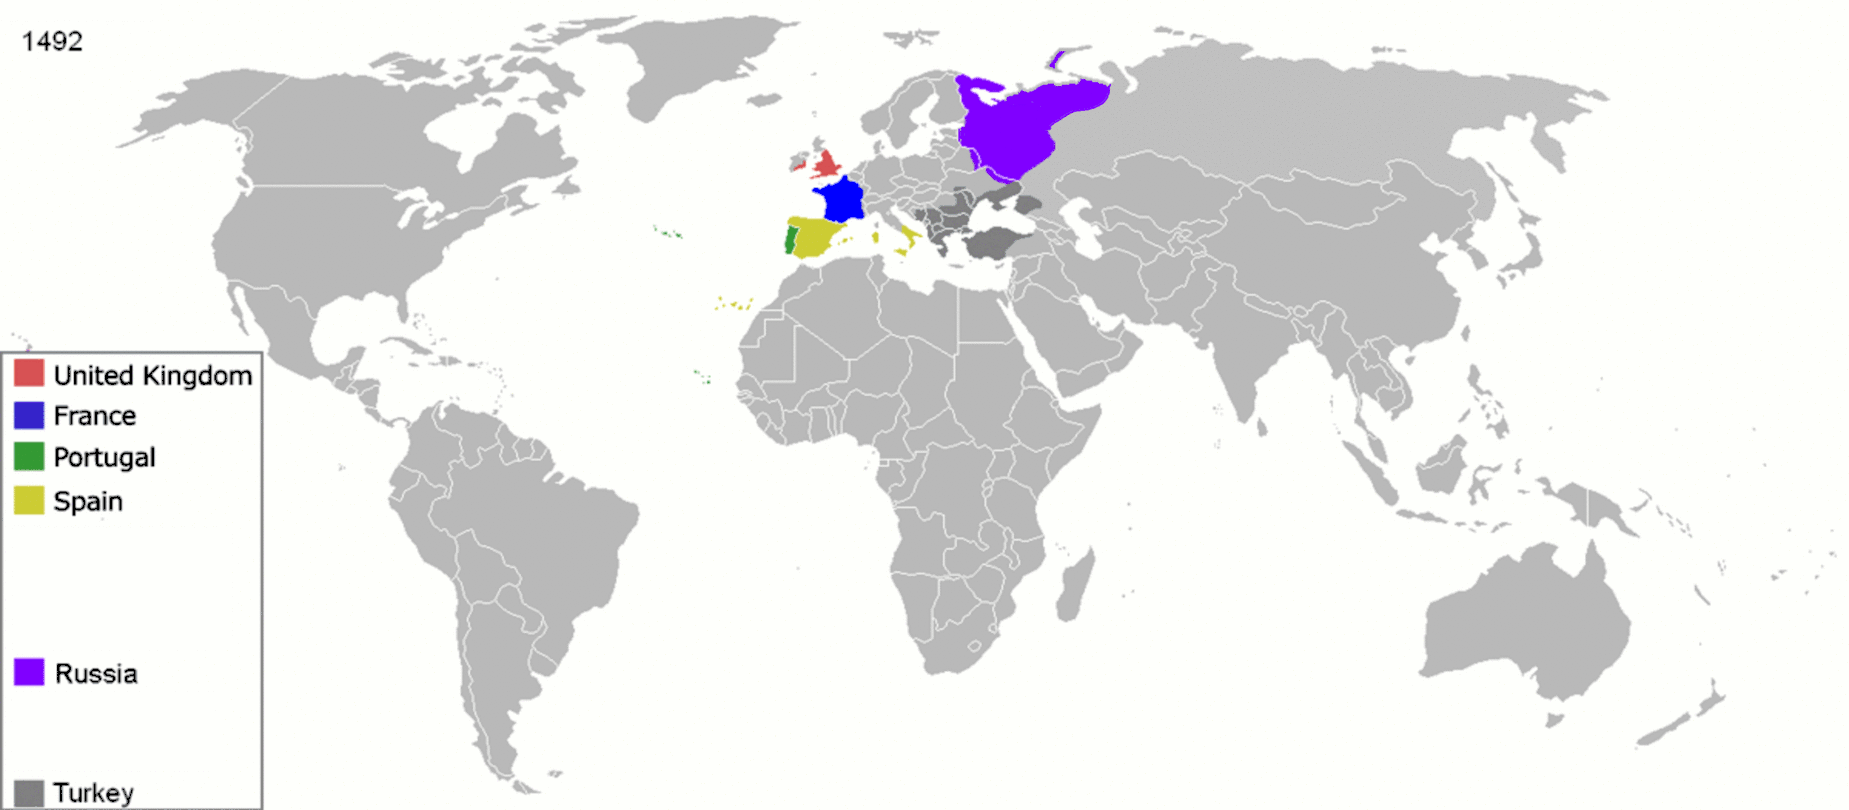 Animation of a world map showing colonial influence of different empires in different colors from the 15th to the 20th century